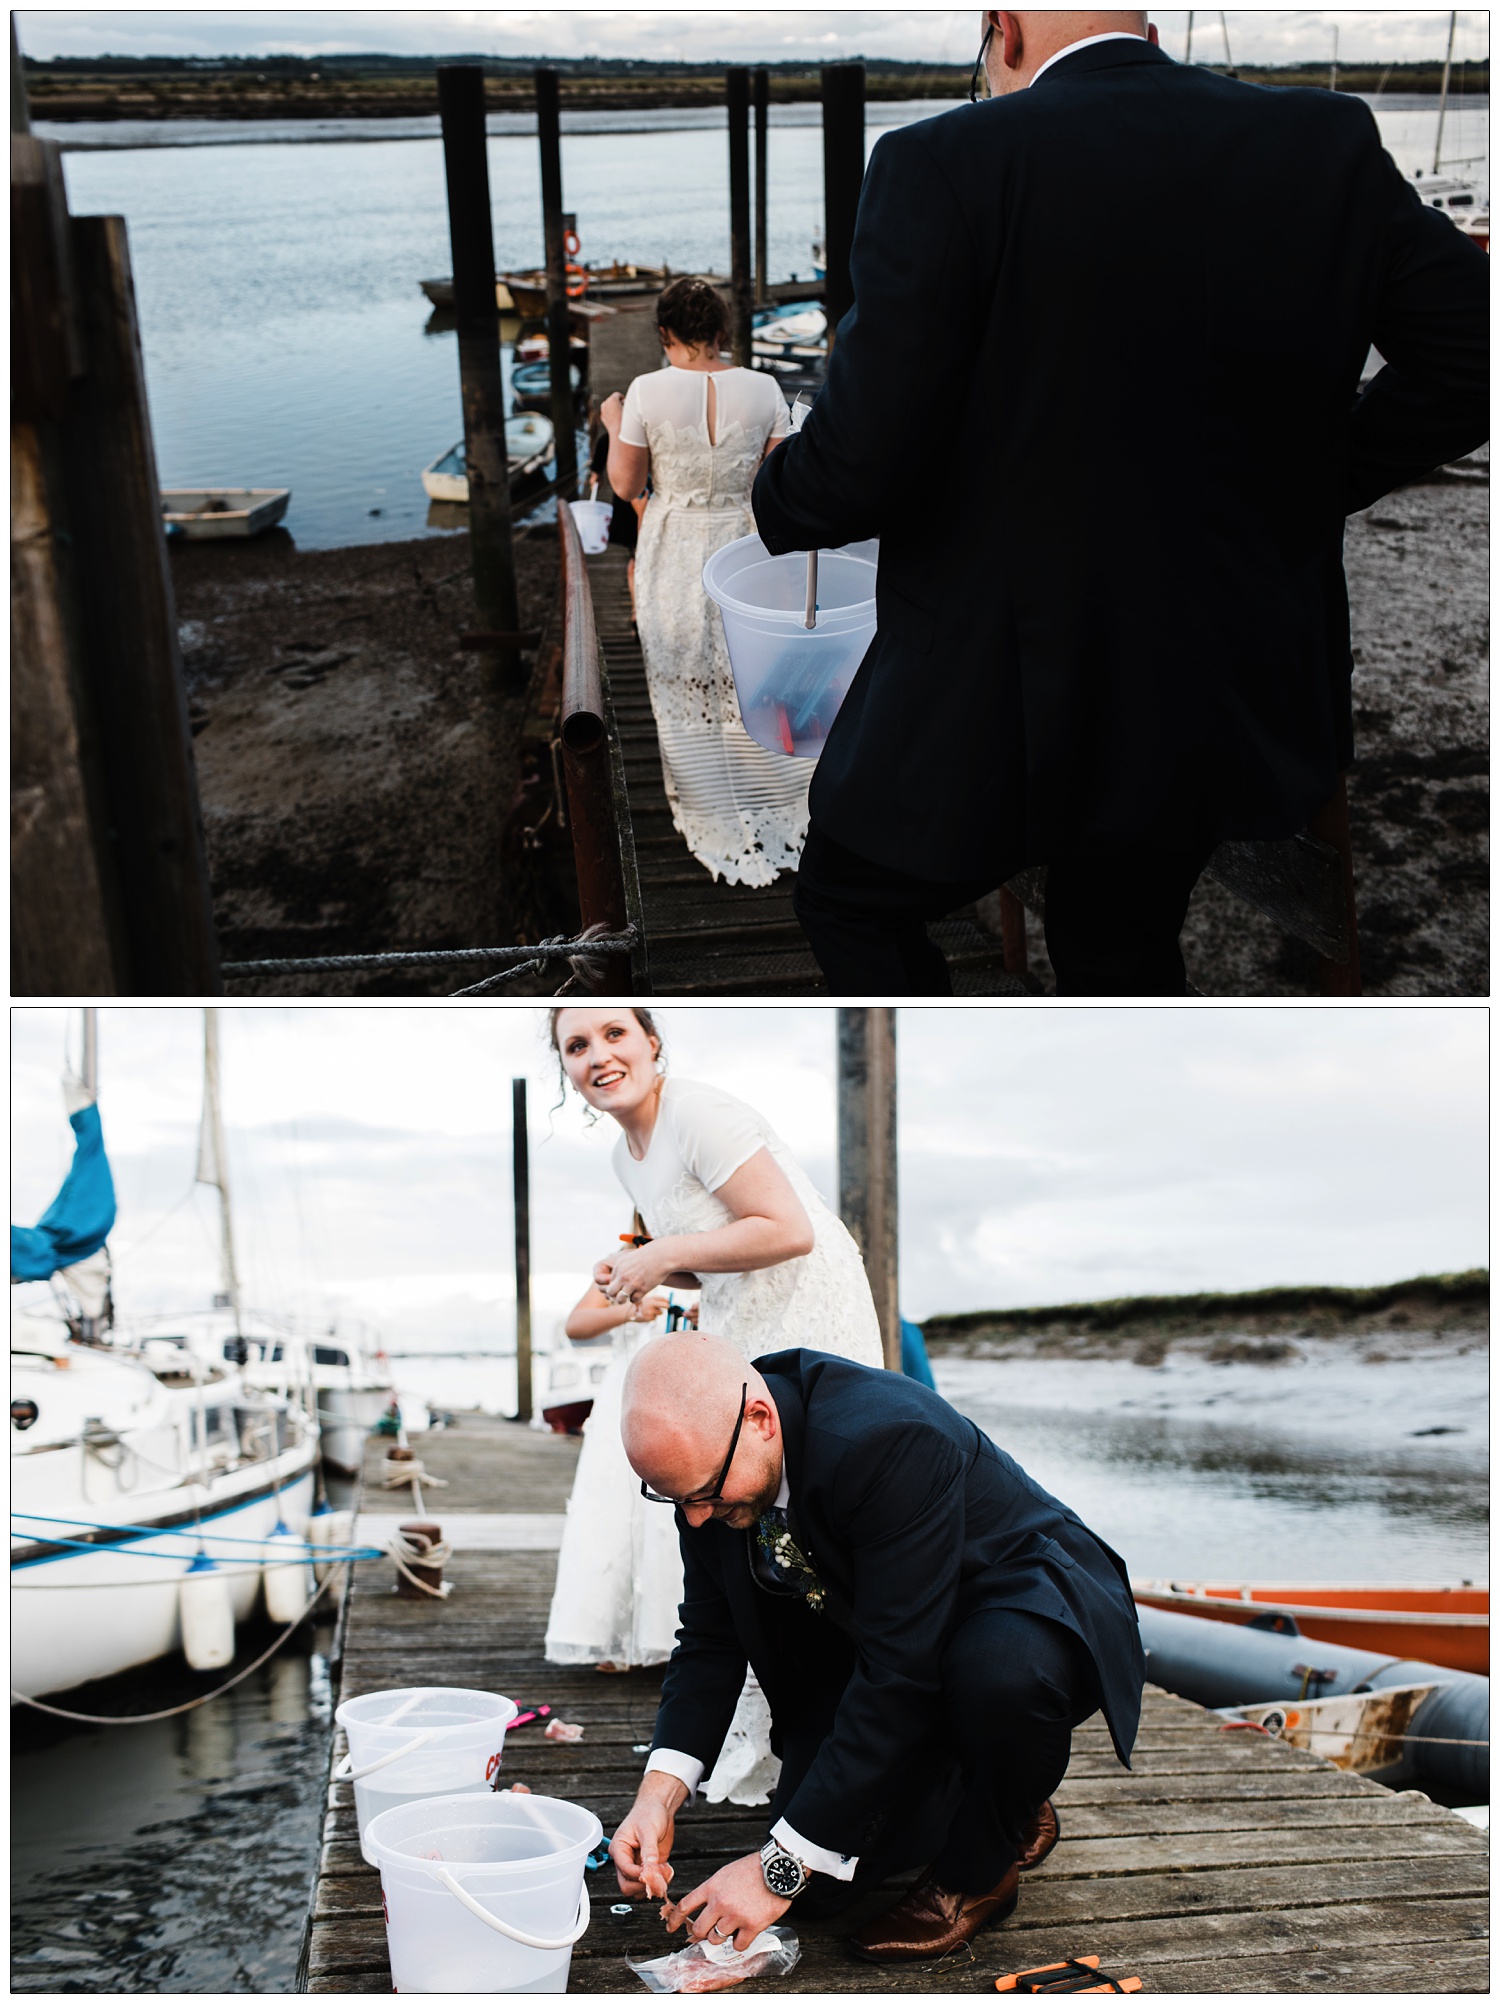 Bride and groom going crabbing off the jetty at the Brandy Hole wedding venue by the River Crouch.